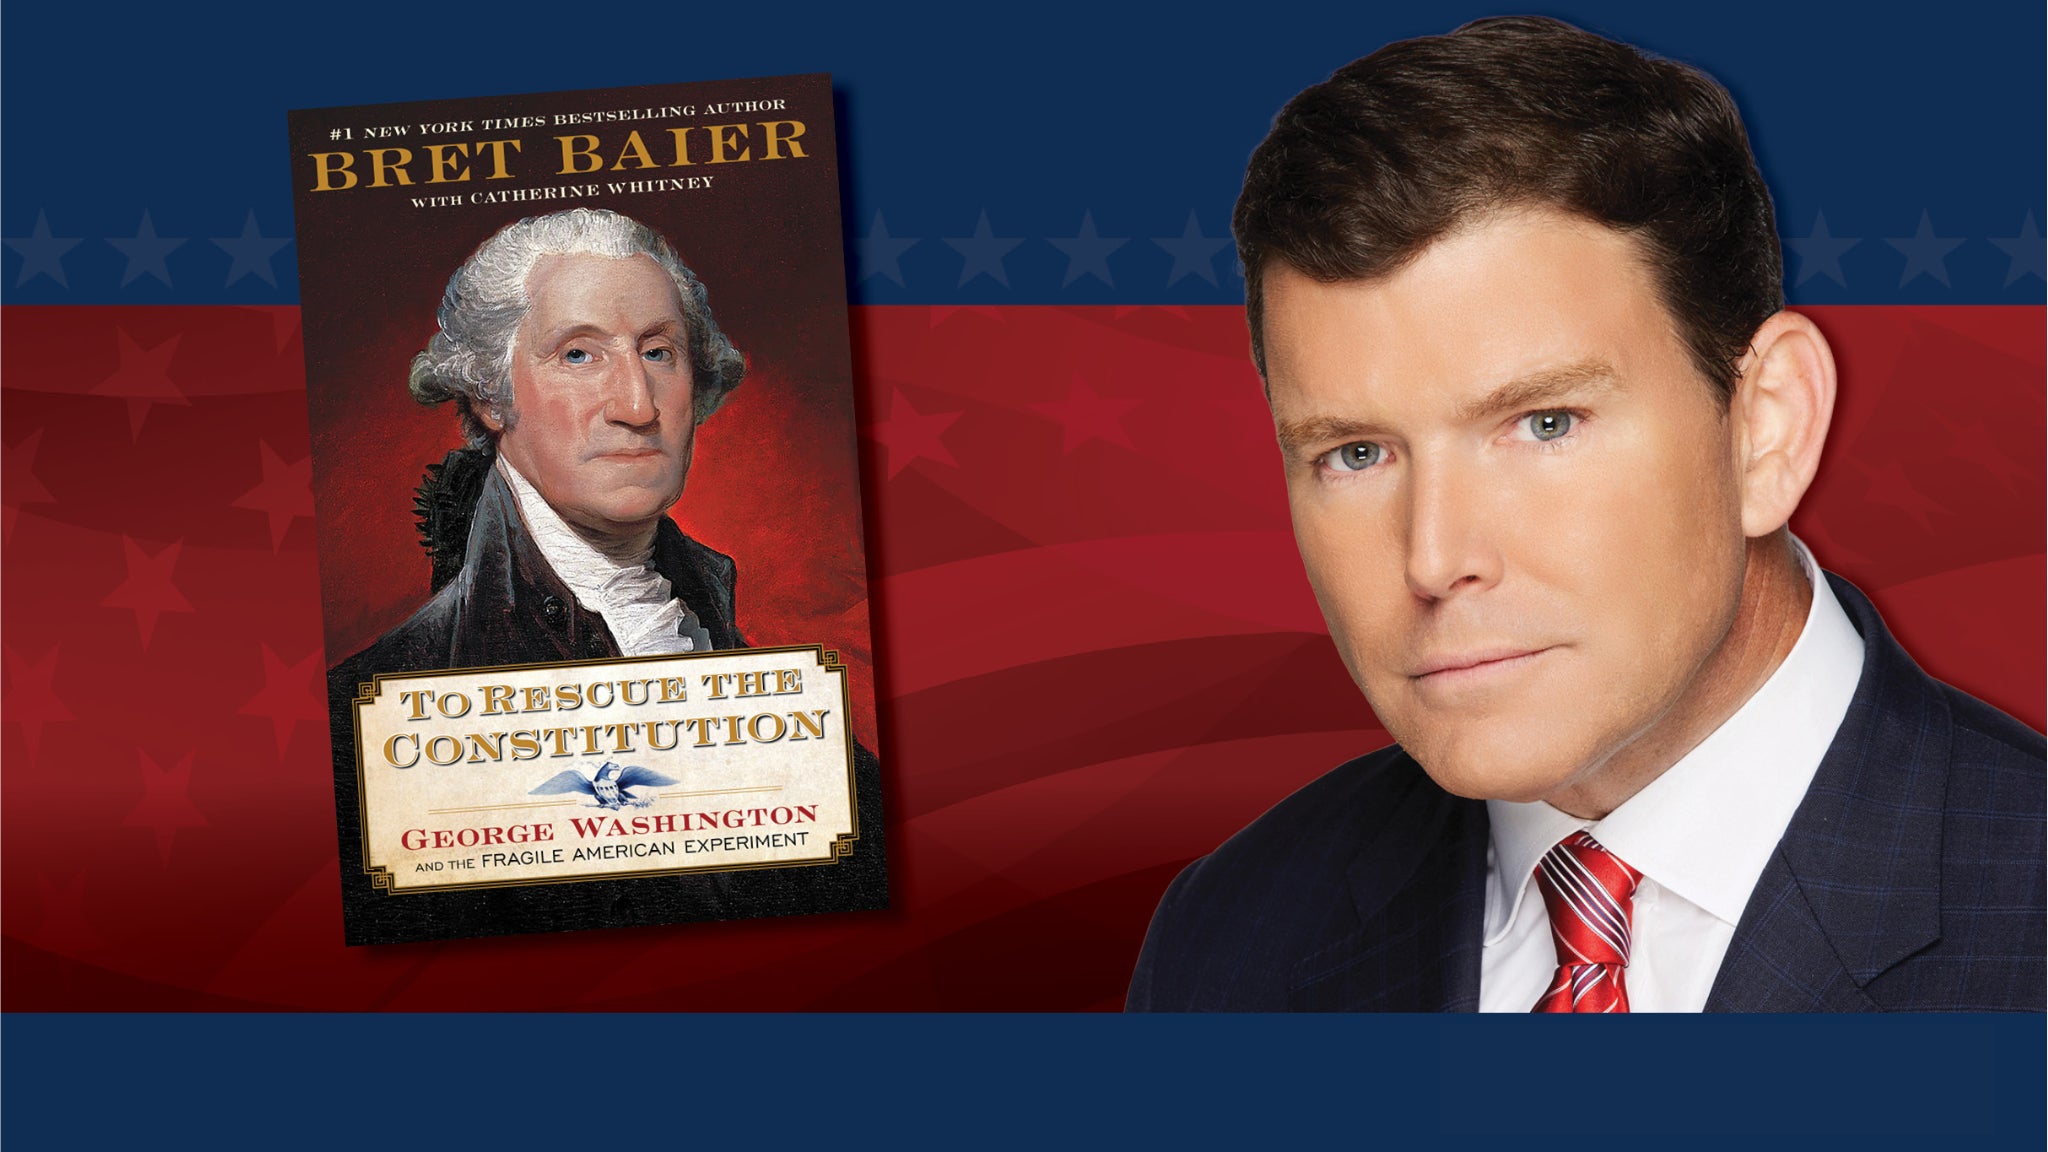 N.C. Museum of History Foundation Lecture Series: Bret Baier